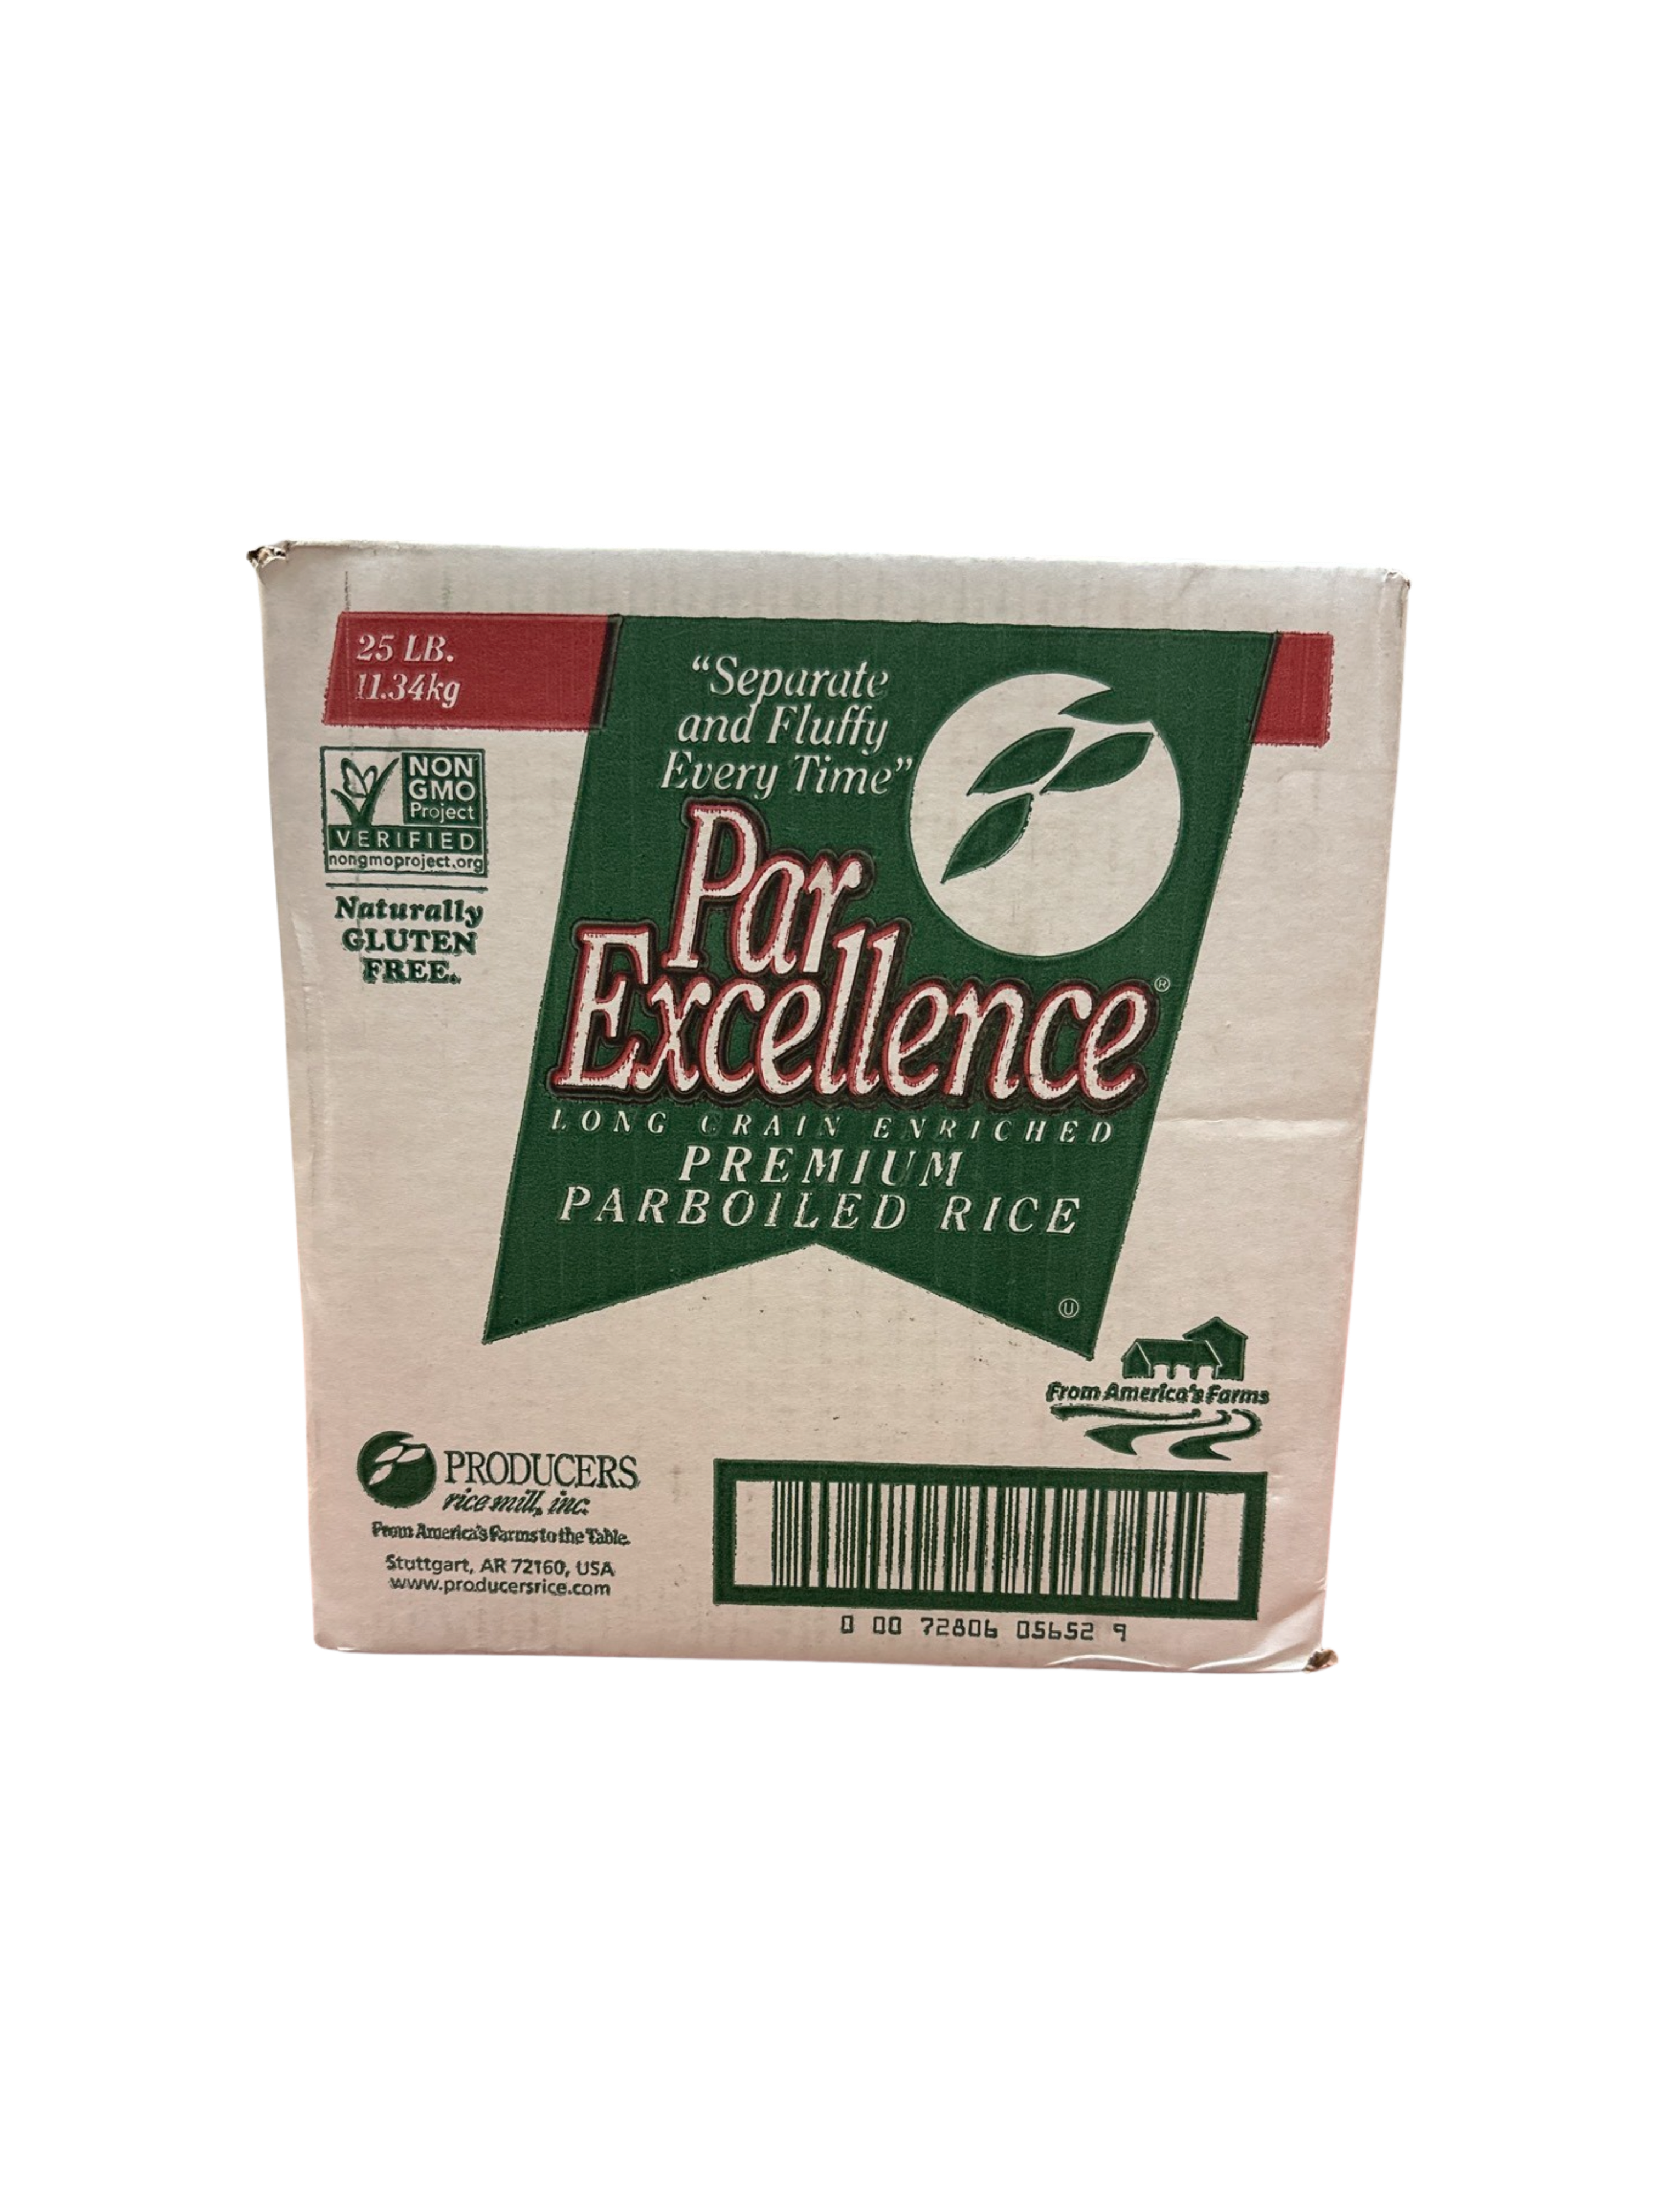 PARBOILED RICE 25LB. CLASSIC